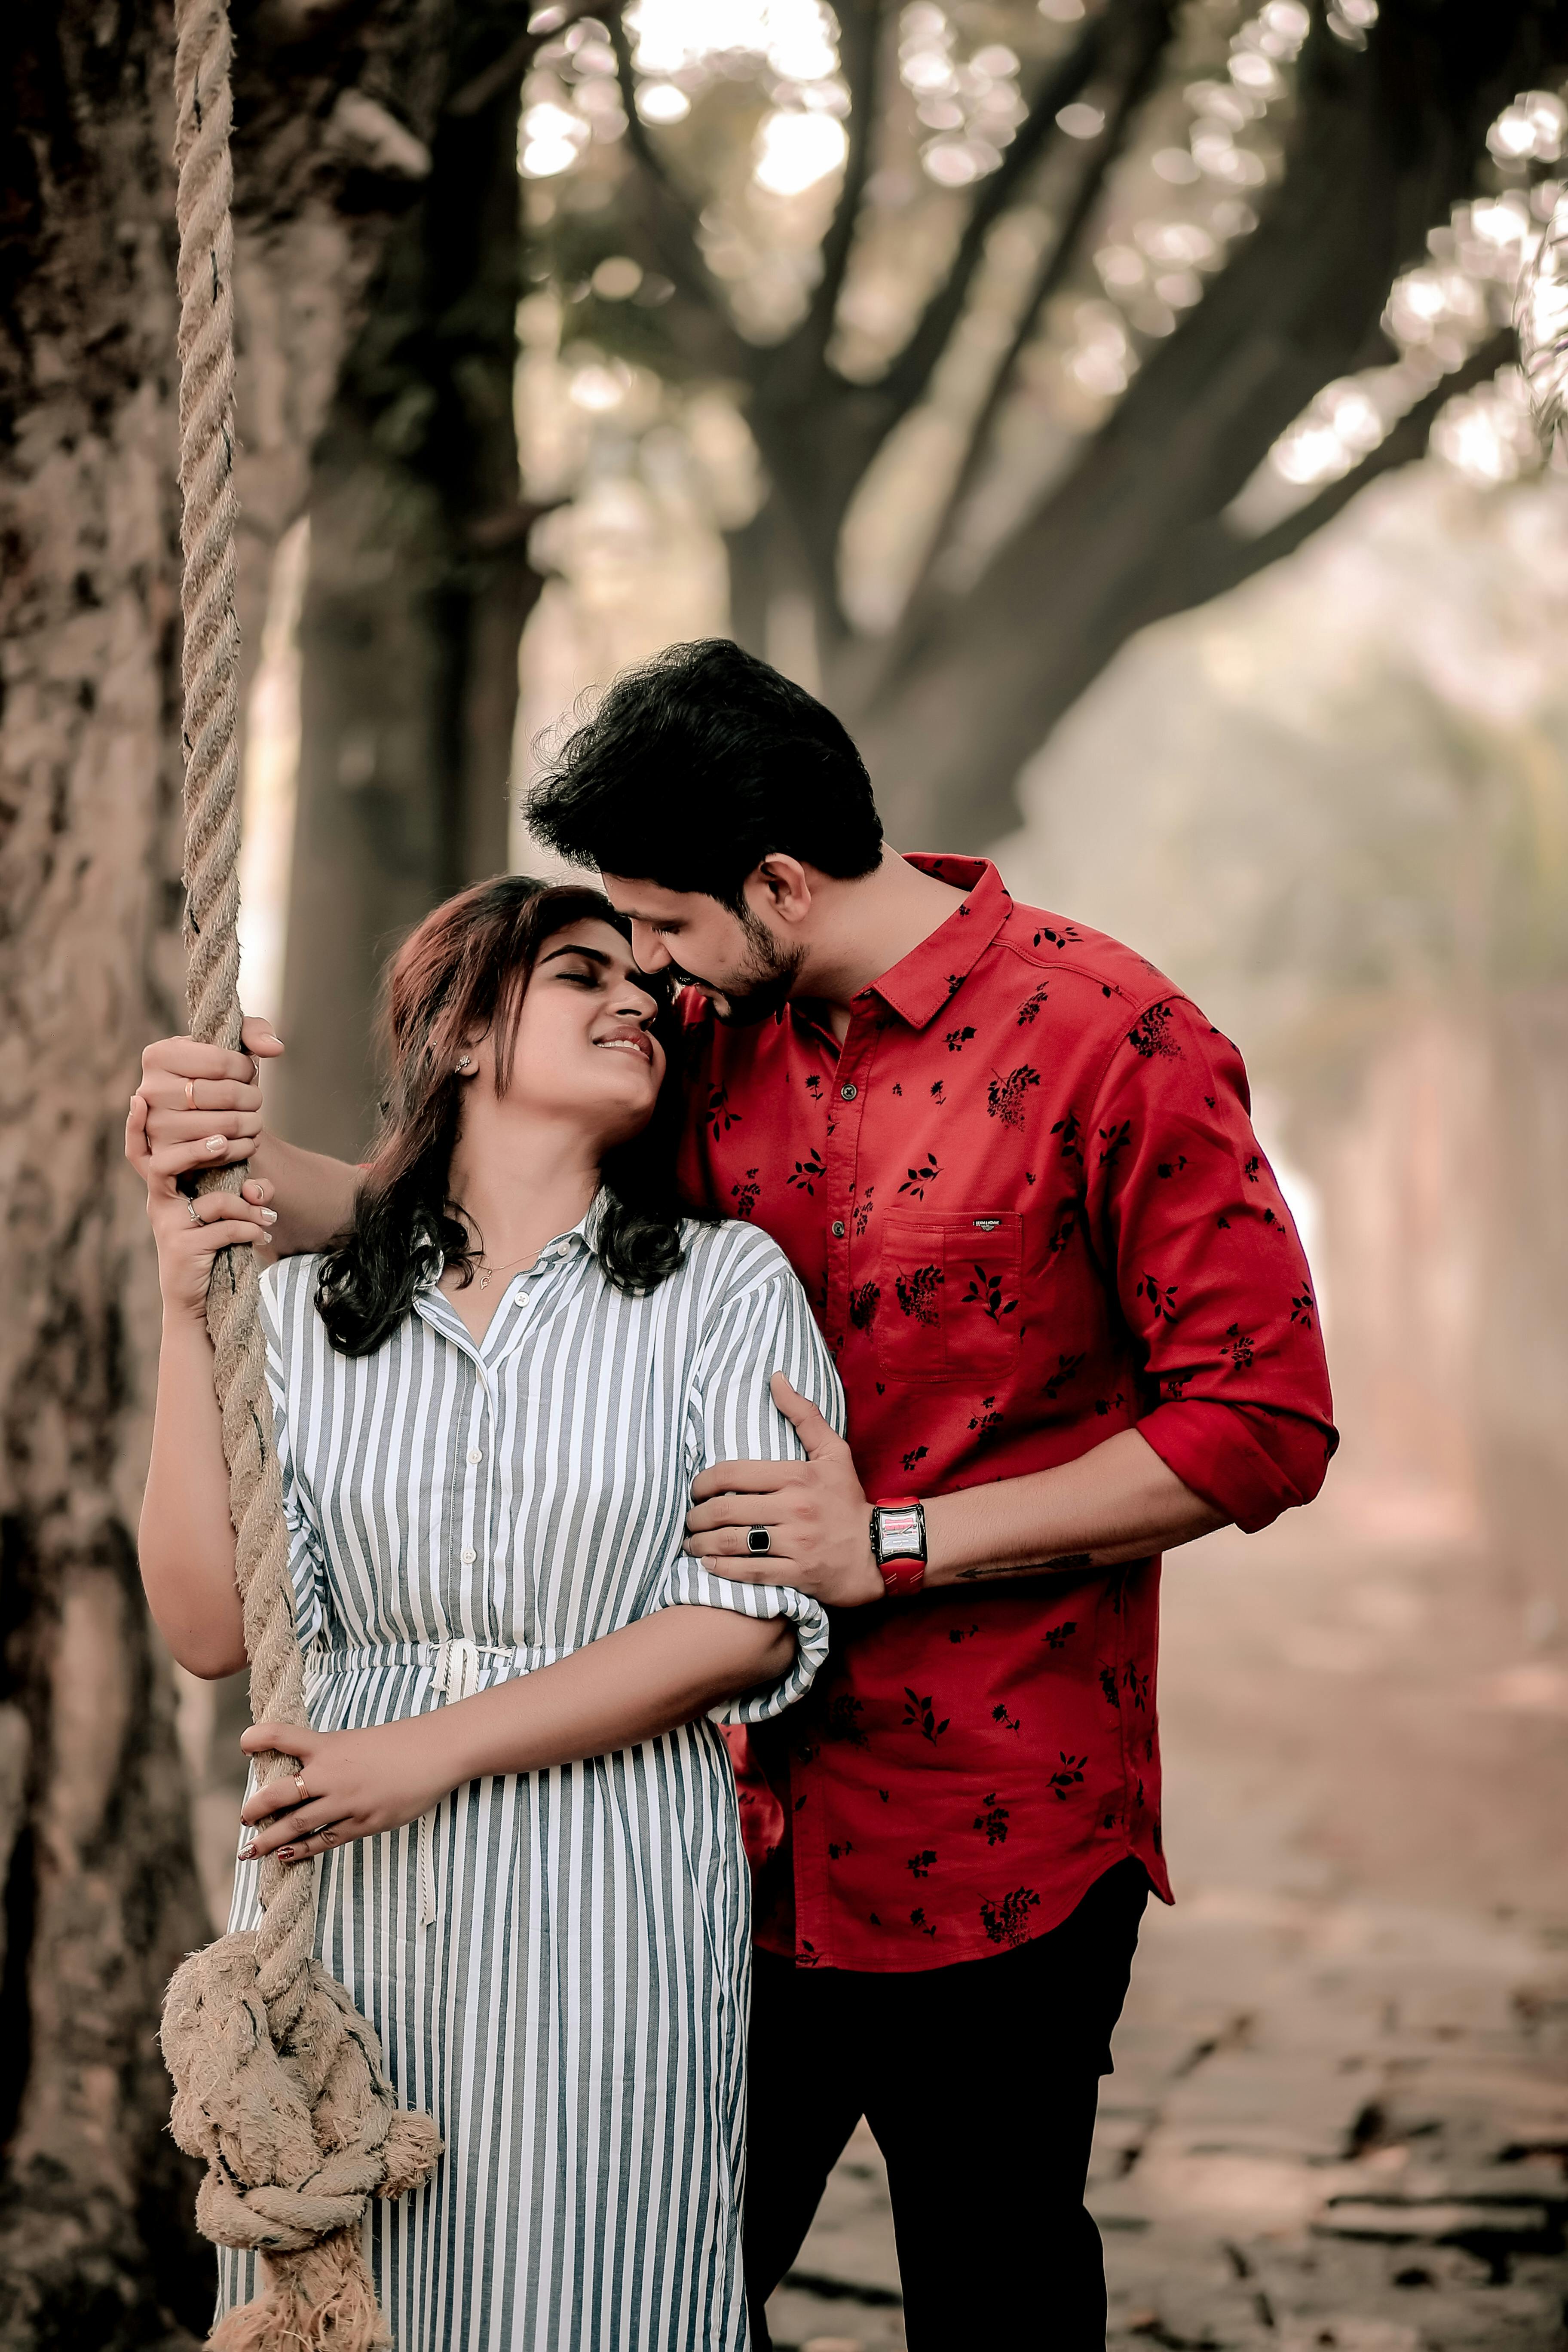 Couples Sitting Pose | Sitting poses, Poses, Portrait photography poses